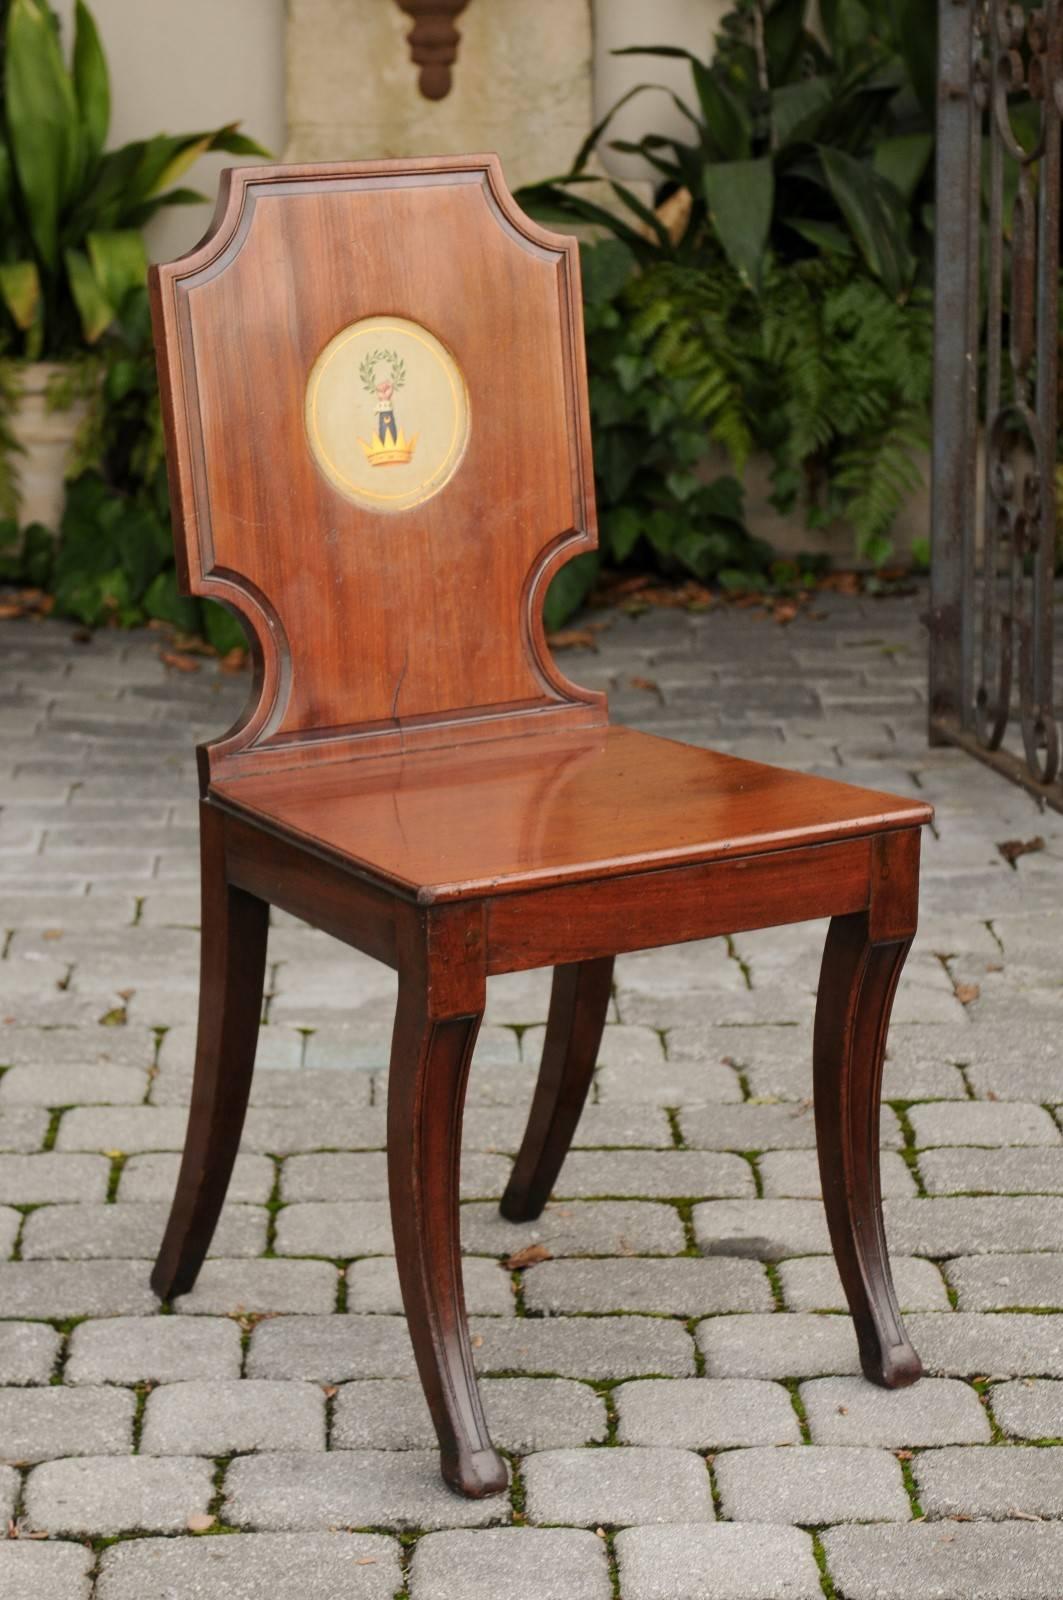 An English wooden hall chair with plank seat and painted crest from the mid-19th century. This English hall chair features a slightly slanted cartouche-shaped back, adorned in its center with medallion depicting a crest made of a crown, from which